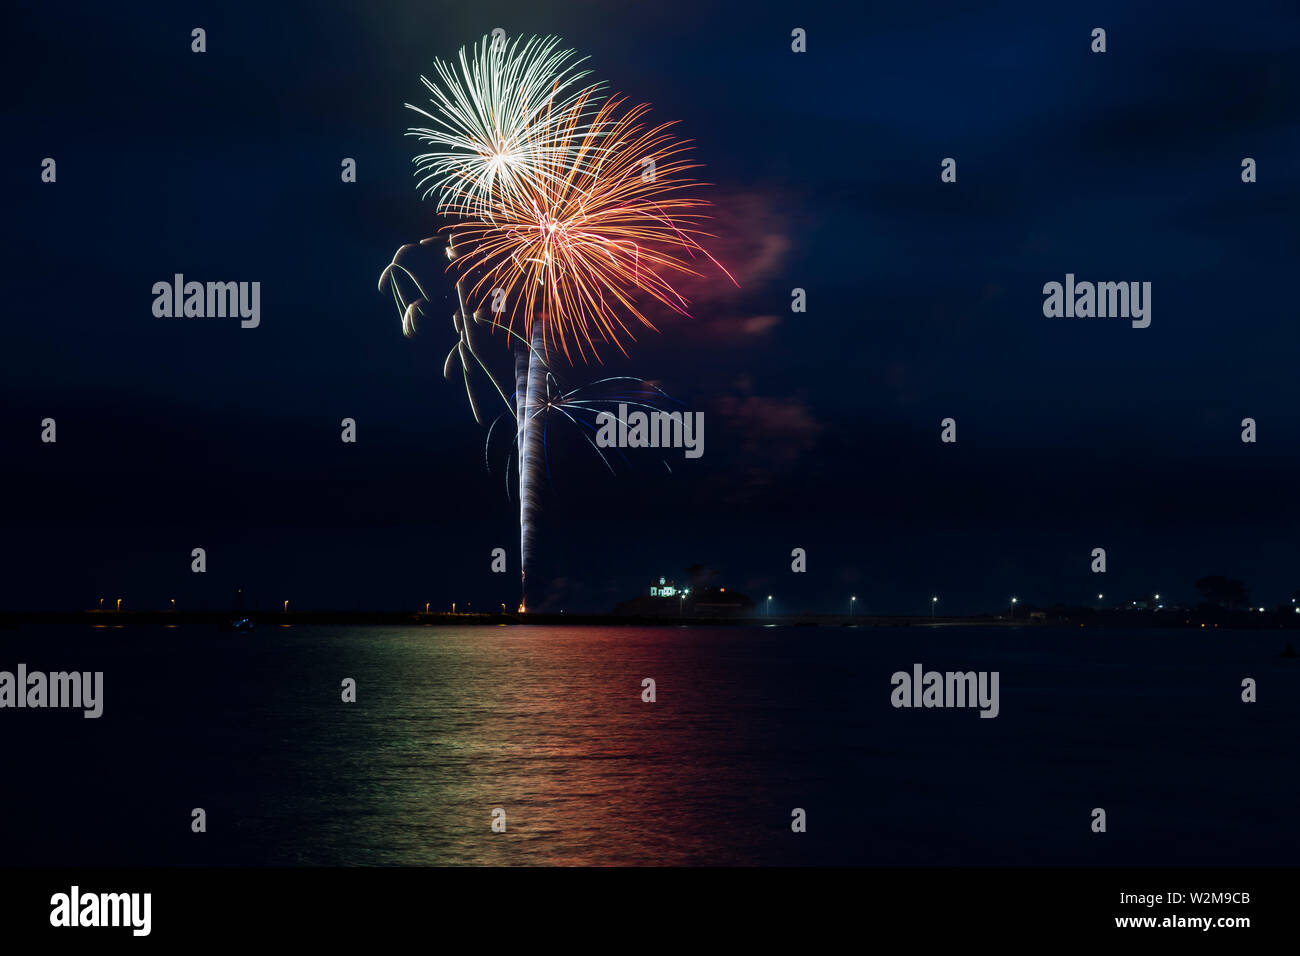 The 4th of July fireworks reflect in the waters of Crescent City Harbor on the Pacific Ocean in Crescent City, California, USA. Stock Photo